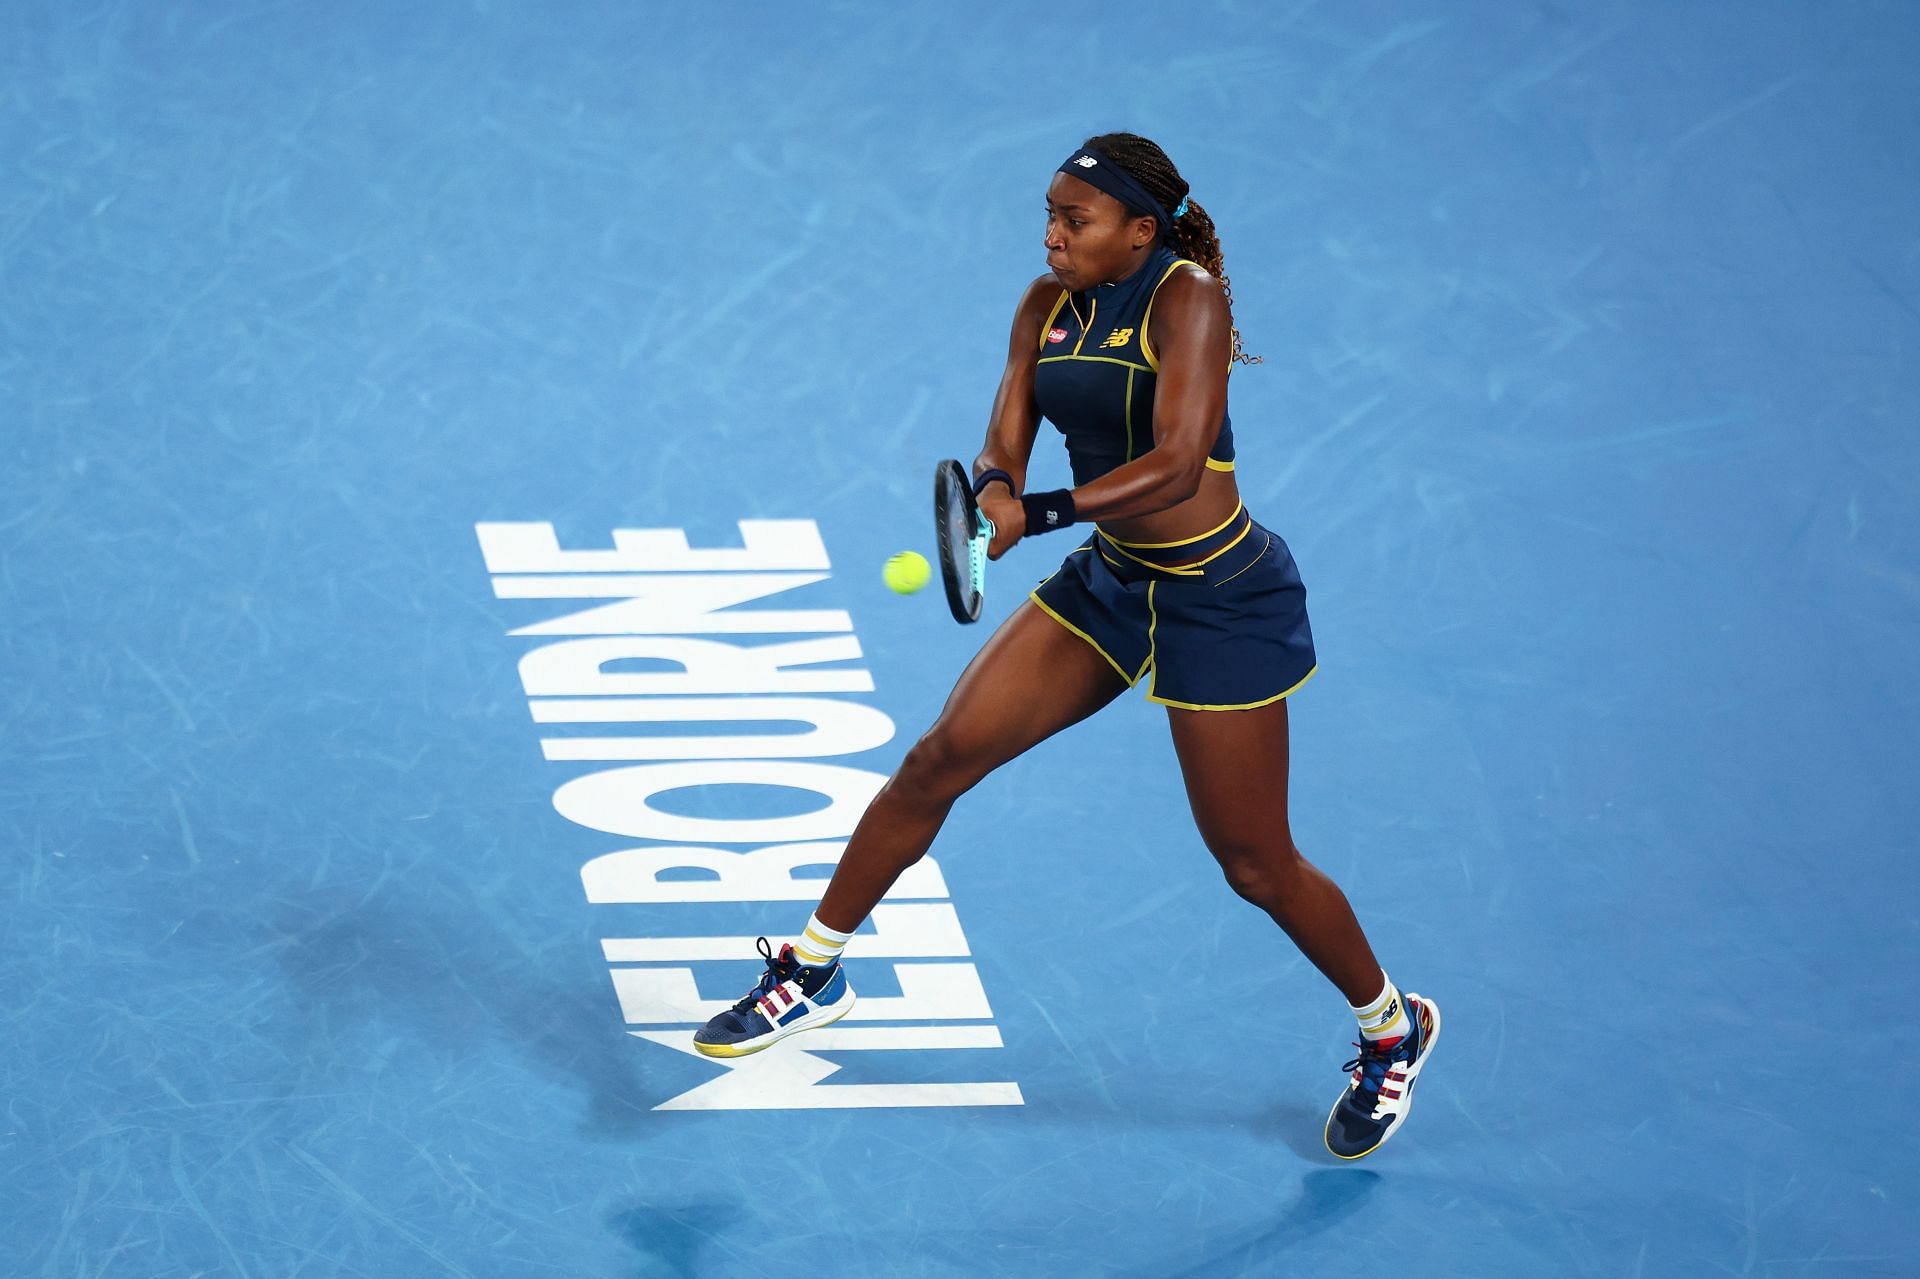 Coco Gauff in action at the Australian Open